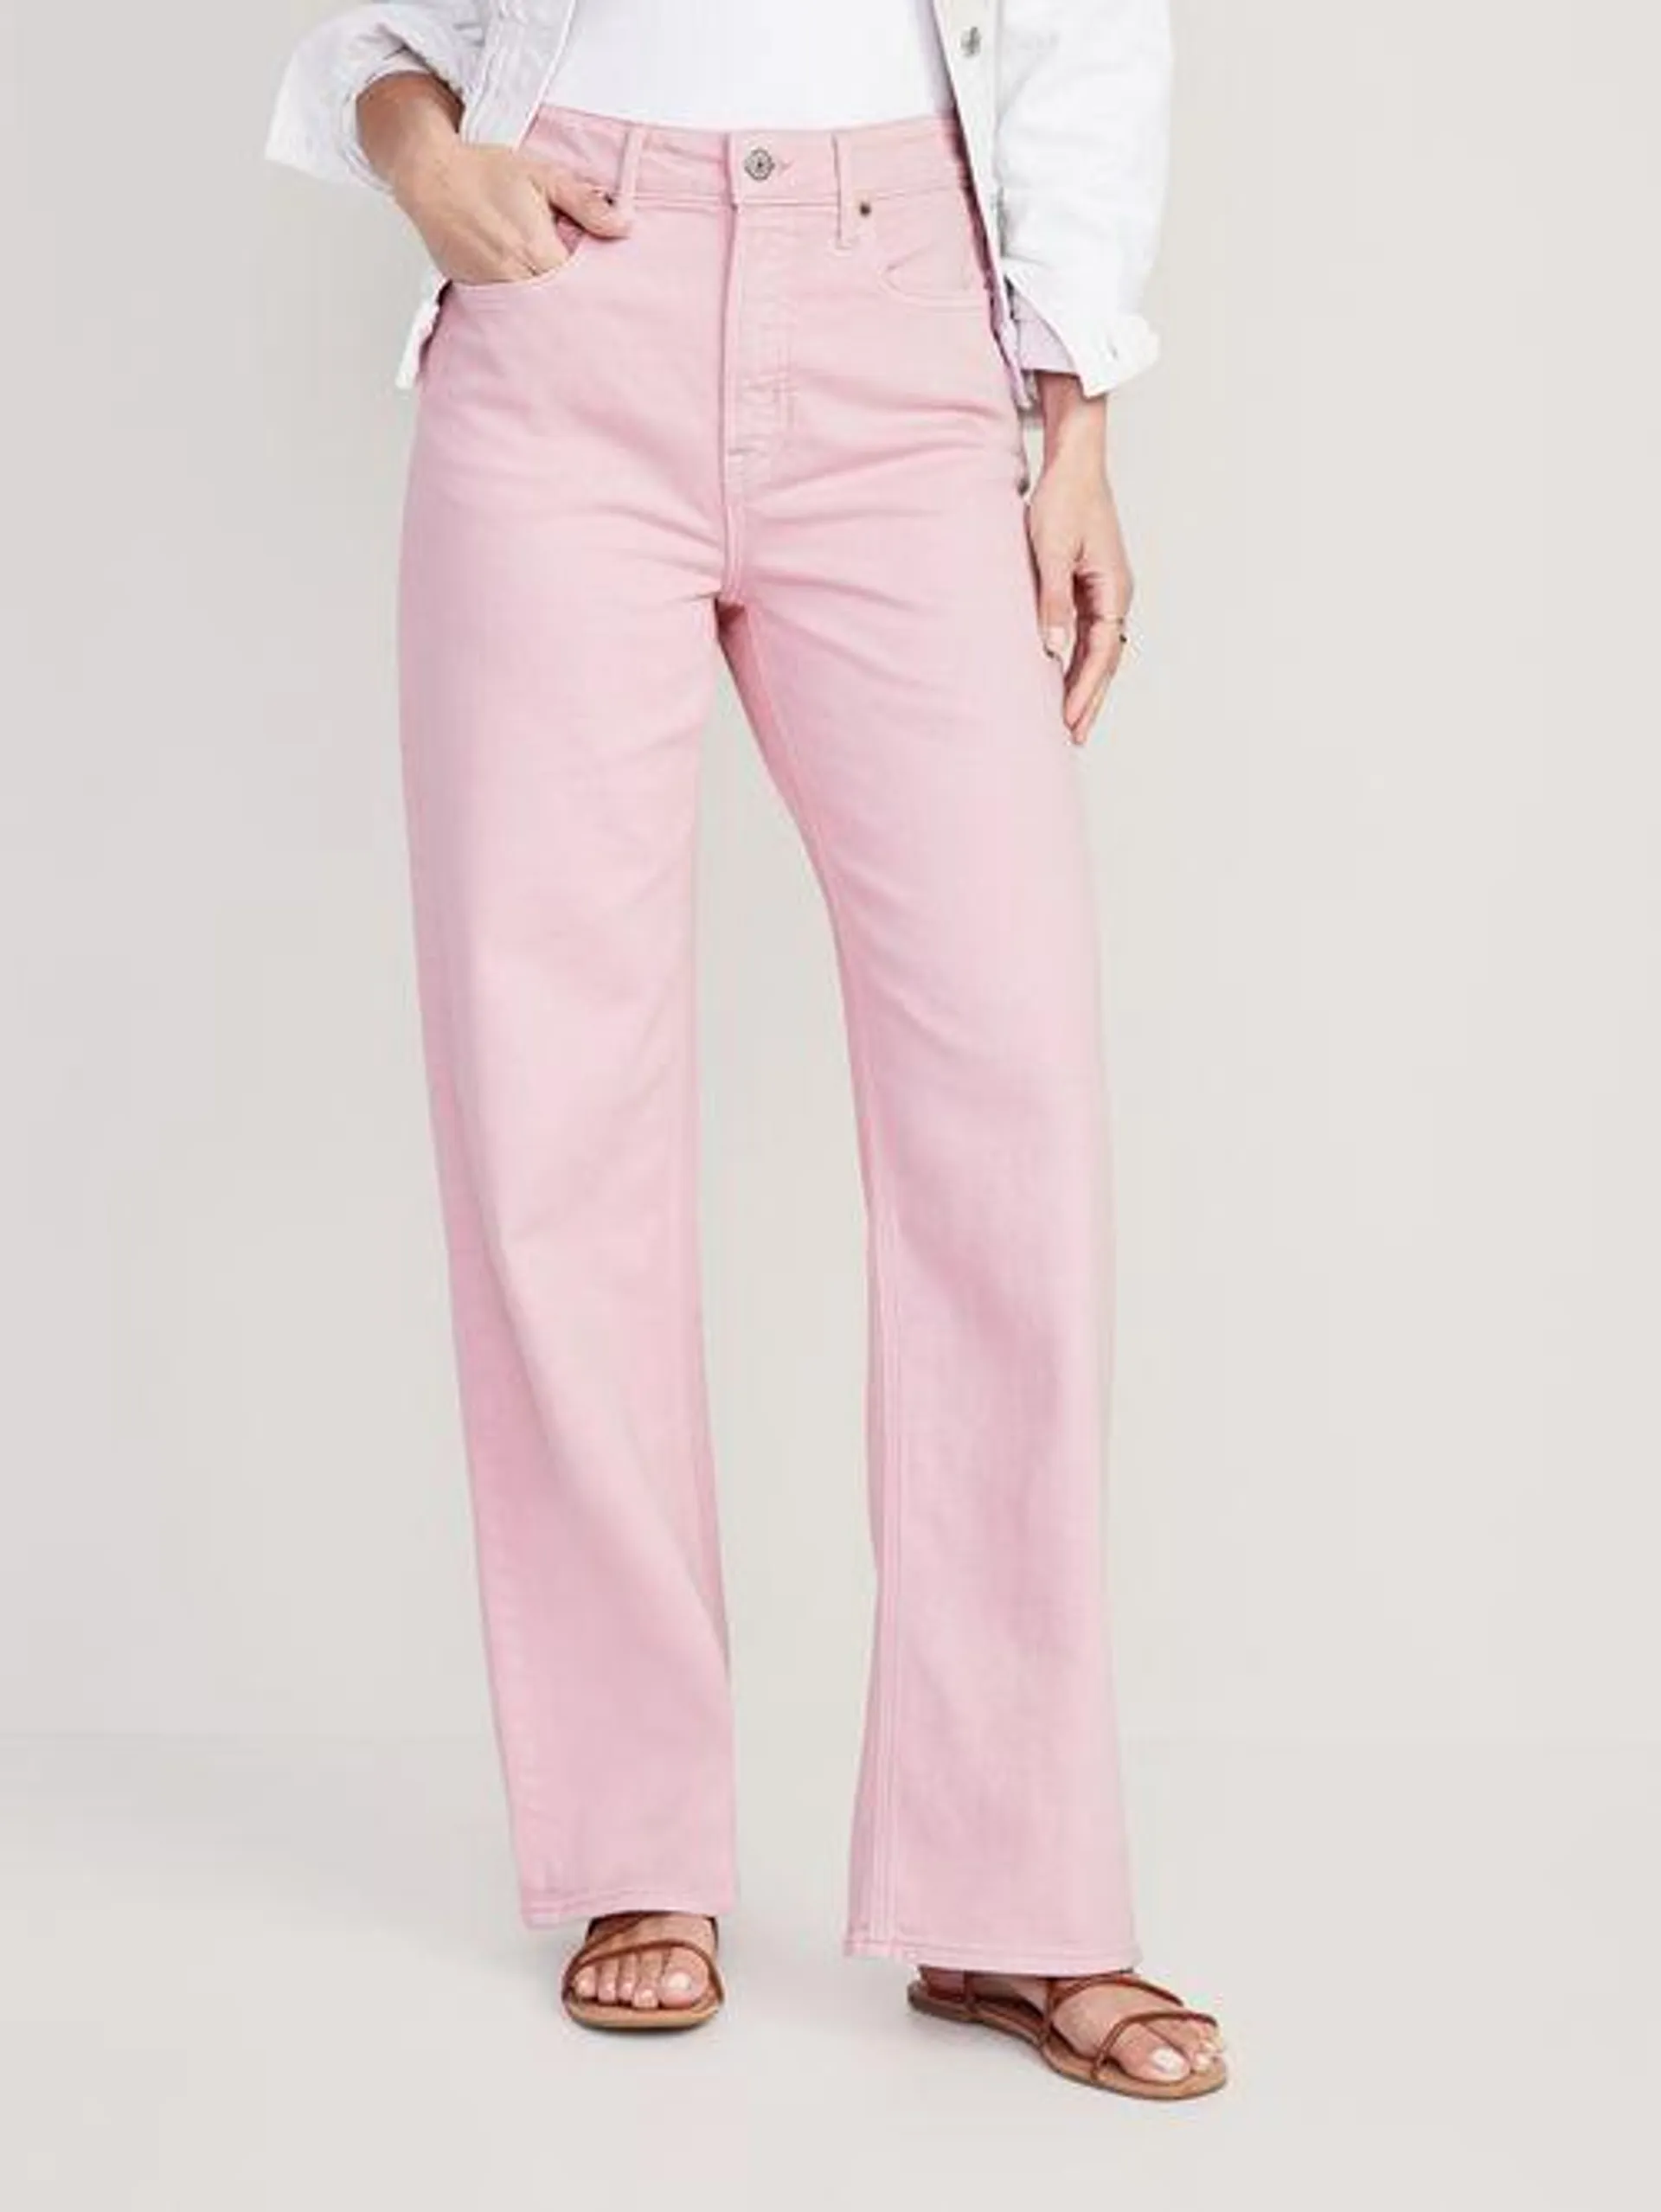 Jeans Extra High-Waisted Pop-Color Wide-Leg Old Navy para Mujer